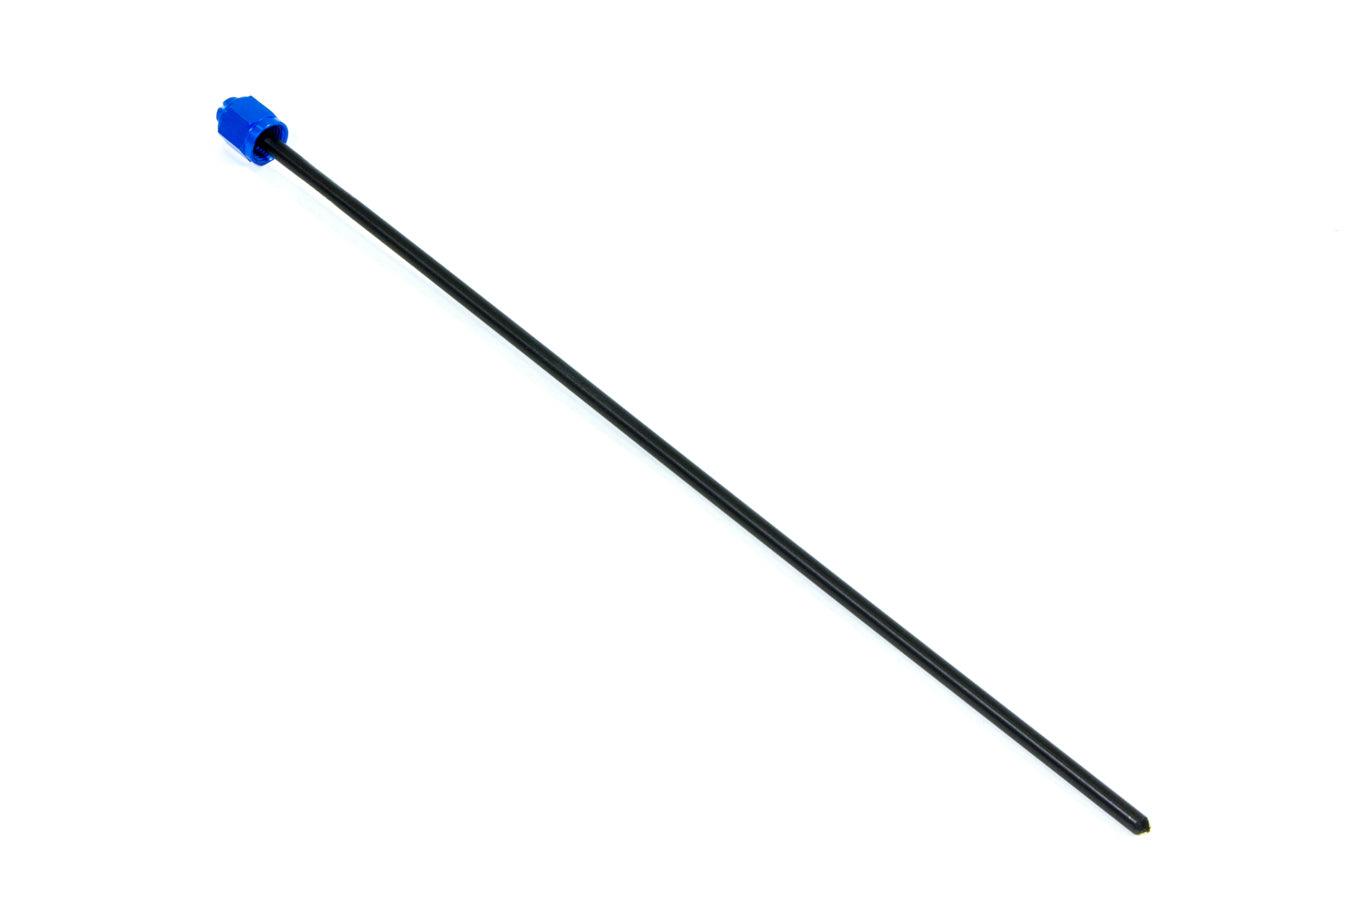 Dip Stick Cut To Length - Burlile Performance Products